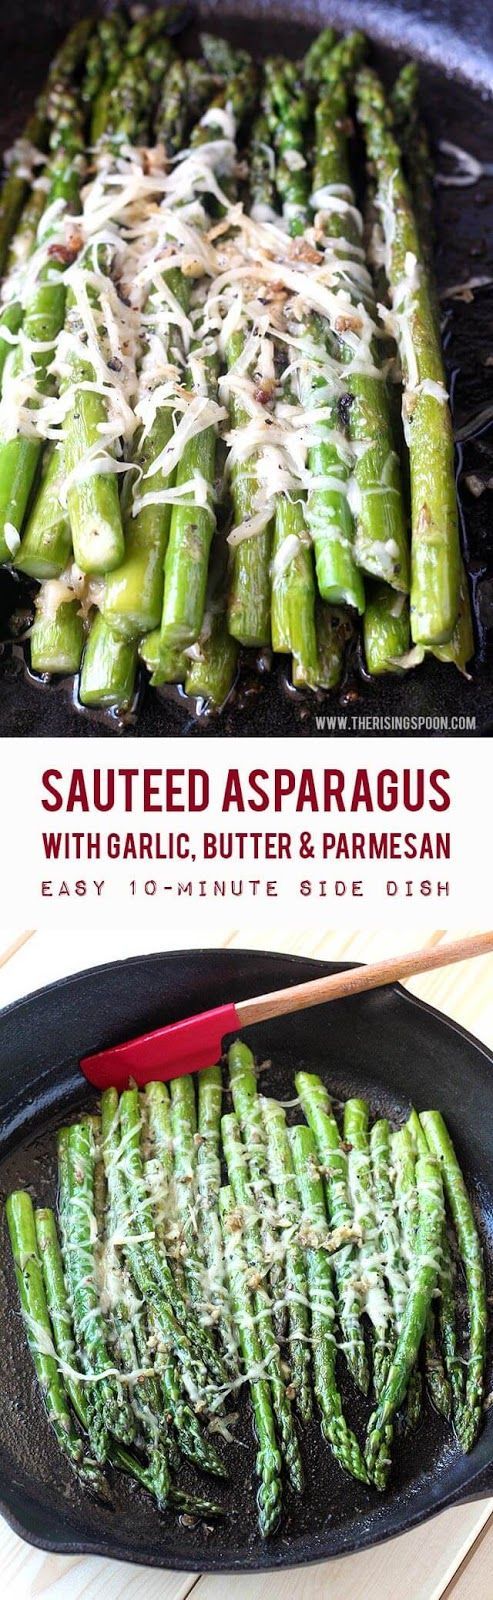 A quick & easy sauteed asparagus recipe with butter, garlic & shredded Parmesan cheese. In about 10 minutes or less, you’ll have a